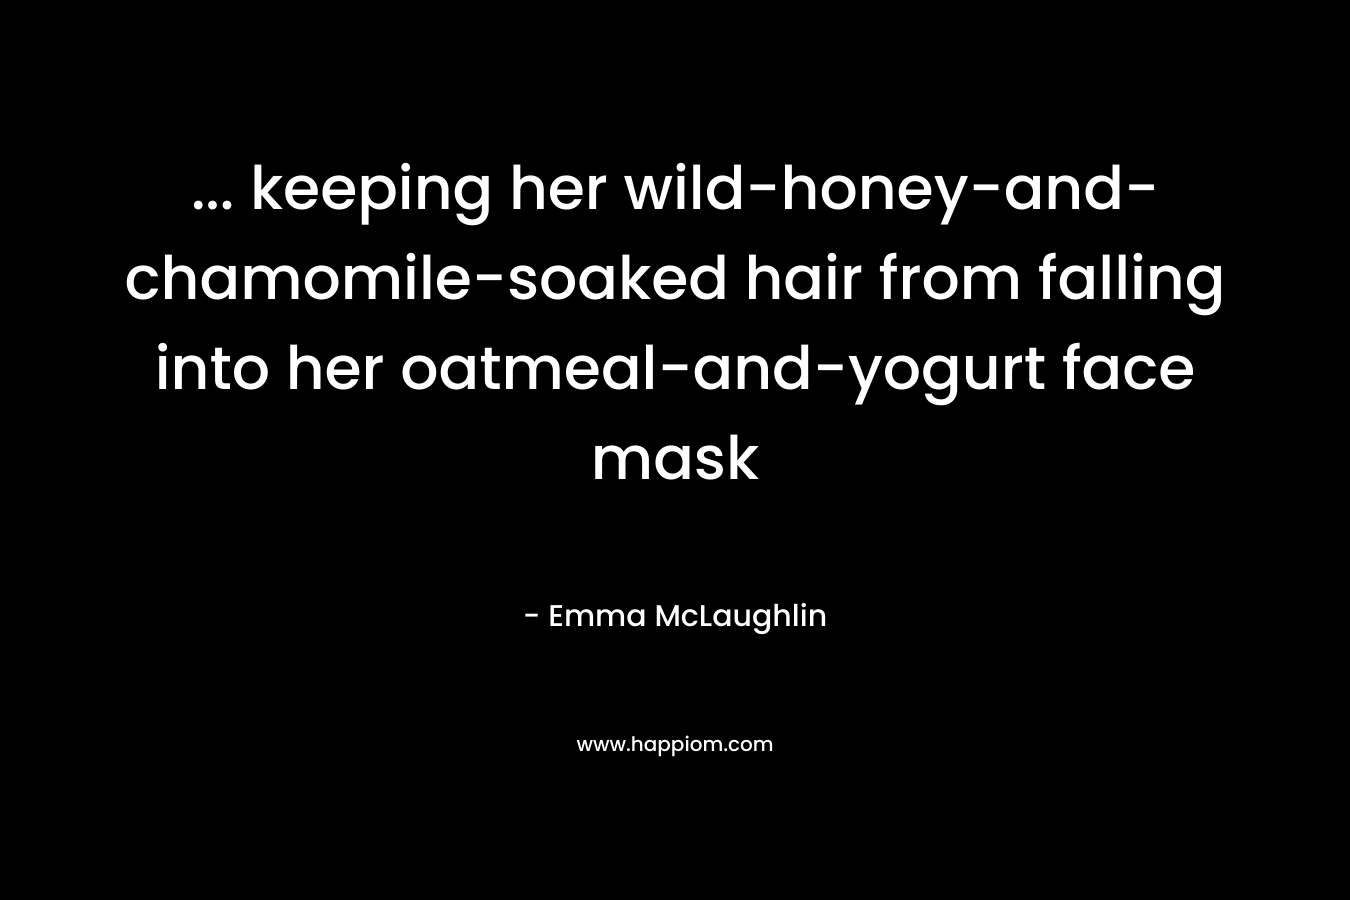 … keeping her wild-honey-and-chamomile-soaked hair from falling into her oatmeal-and-yogurt face mask – Emma McLaughlin